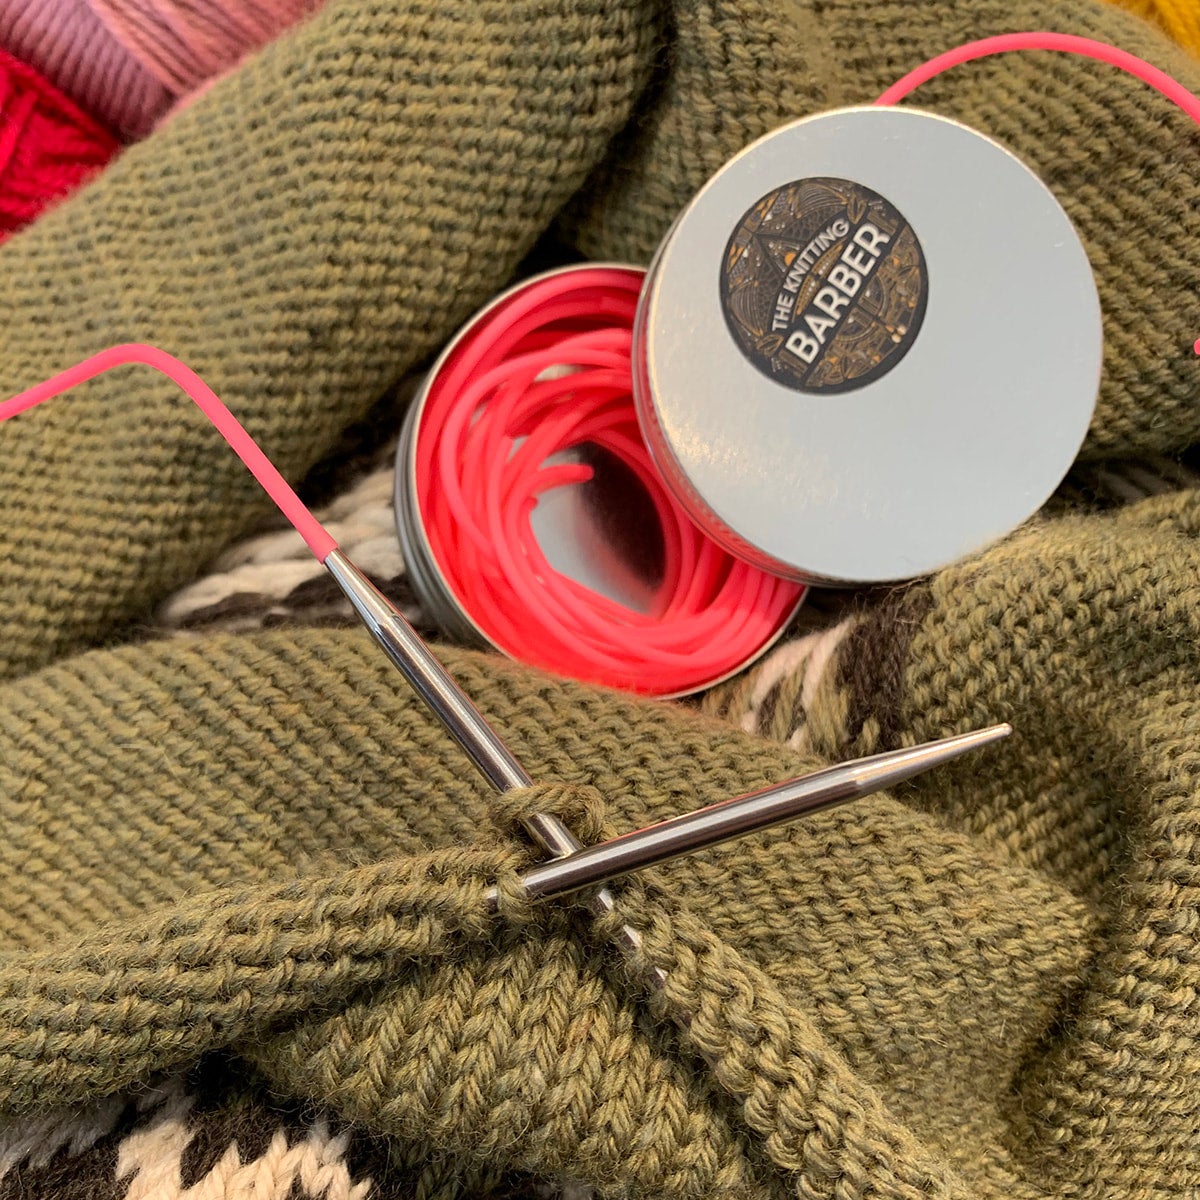 W&Co. The Knitting Barber CORDS - Woolly&Co.